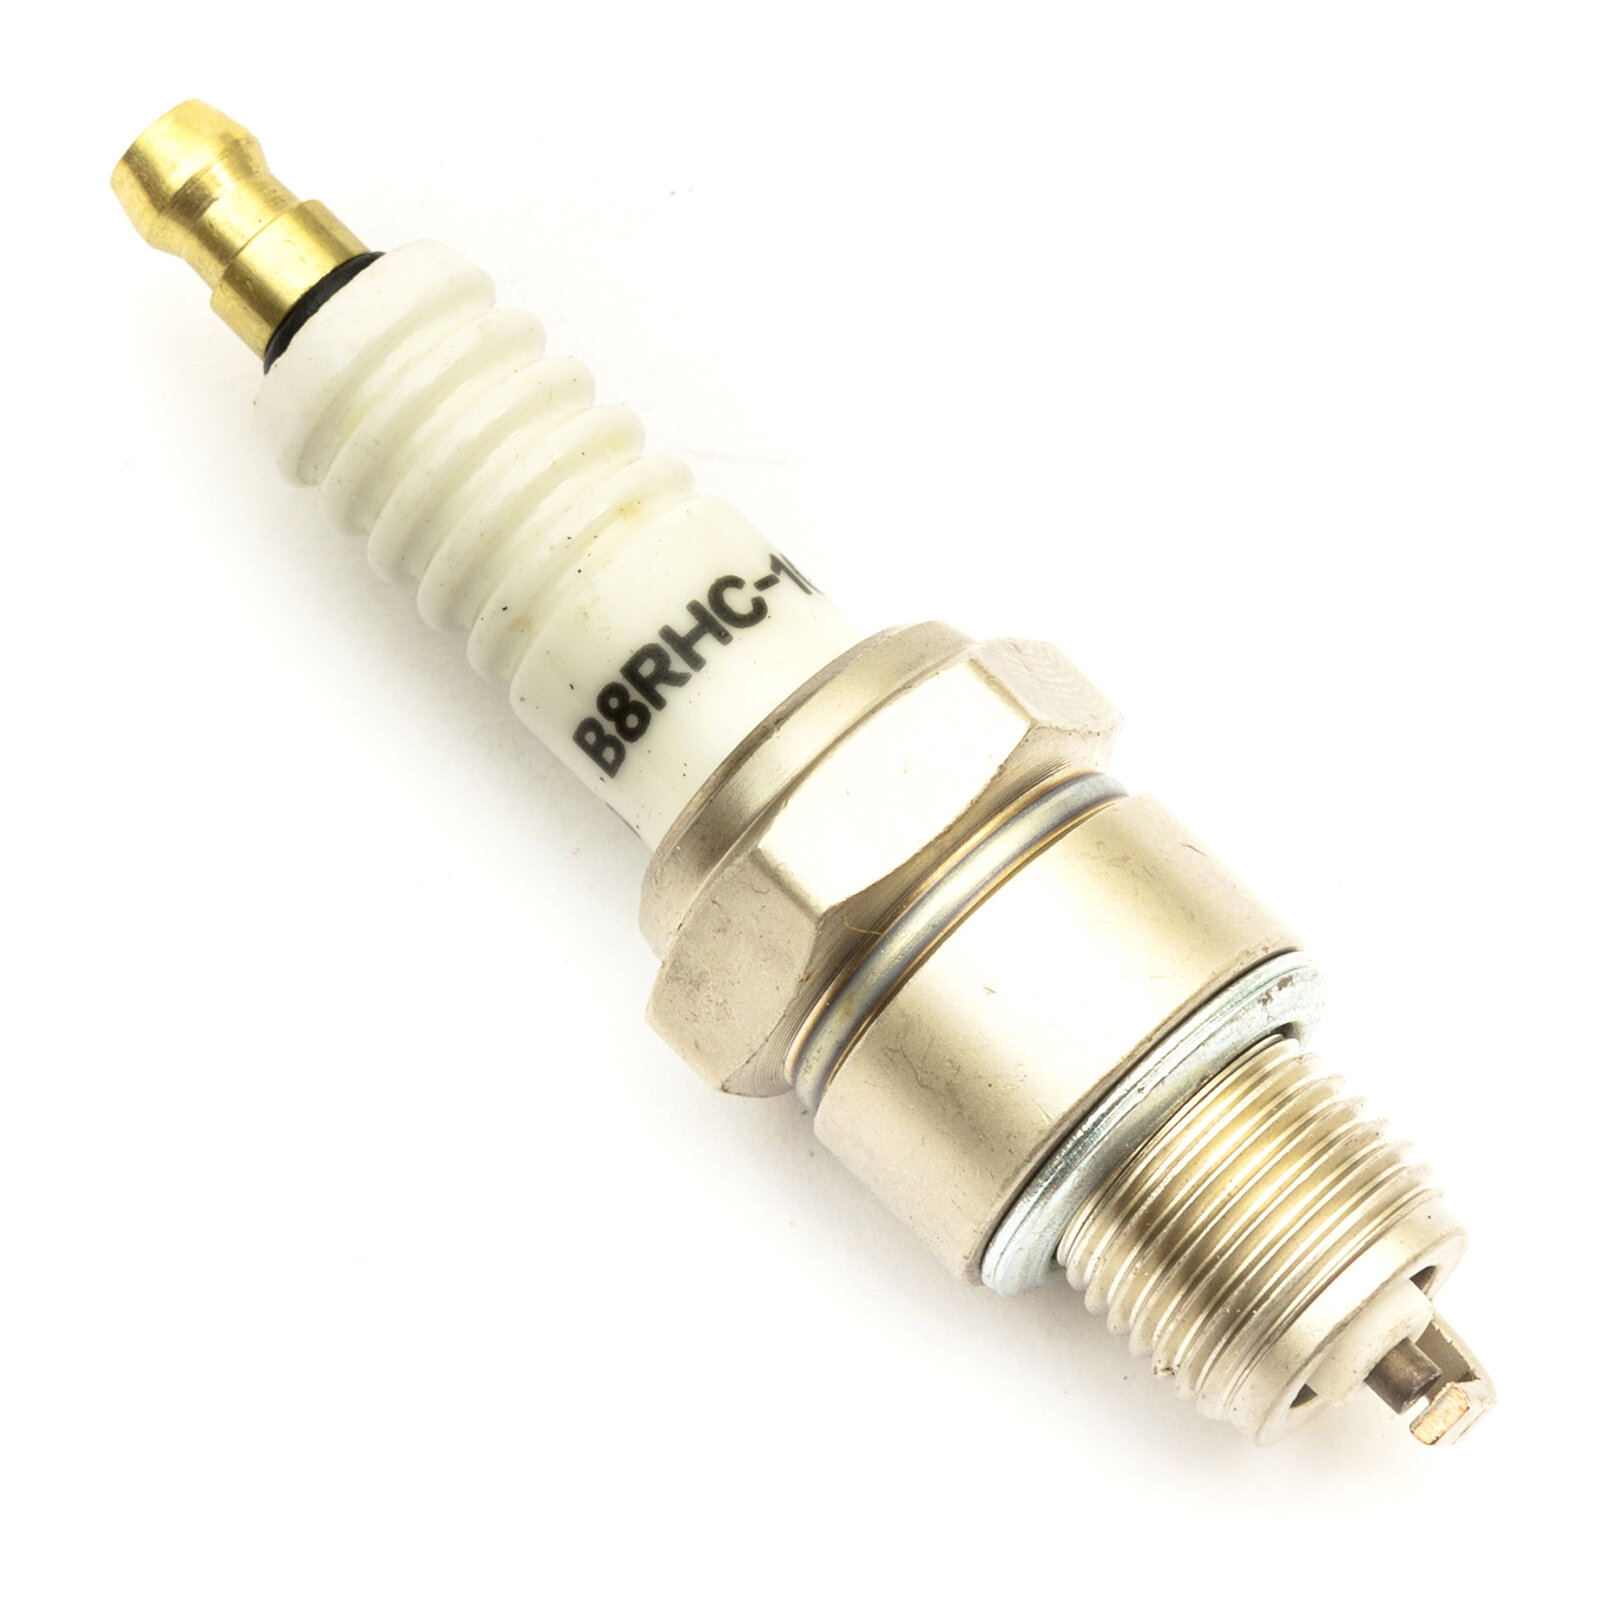 Torch Takumi Spark Plug Replace NGK BR8HS-10 Fits Suzuki DT150G Outboard Motor